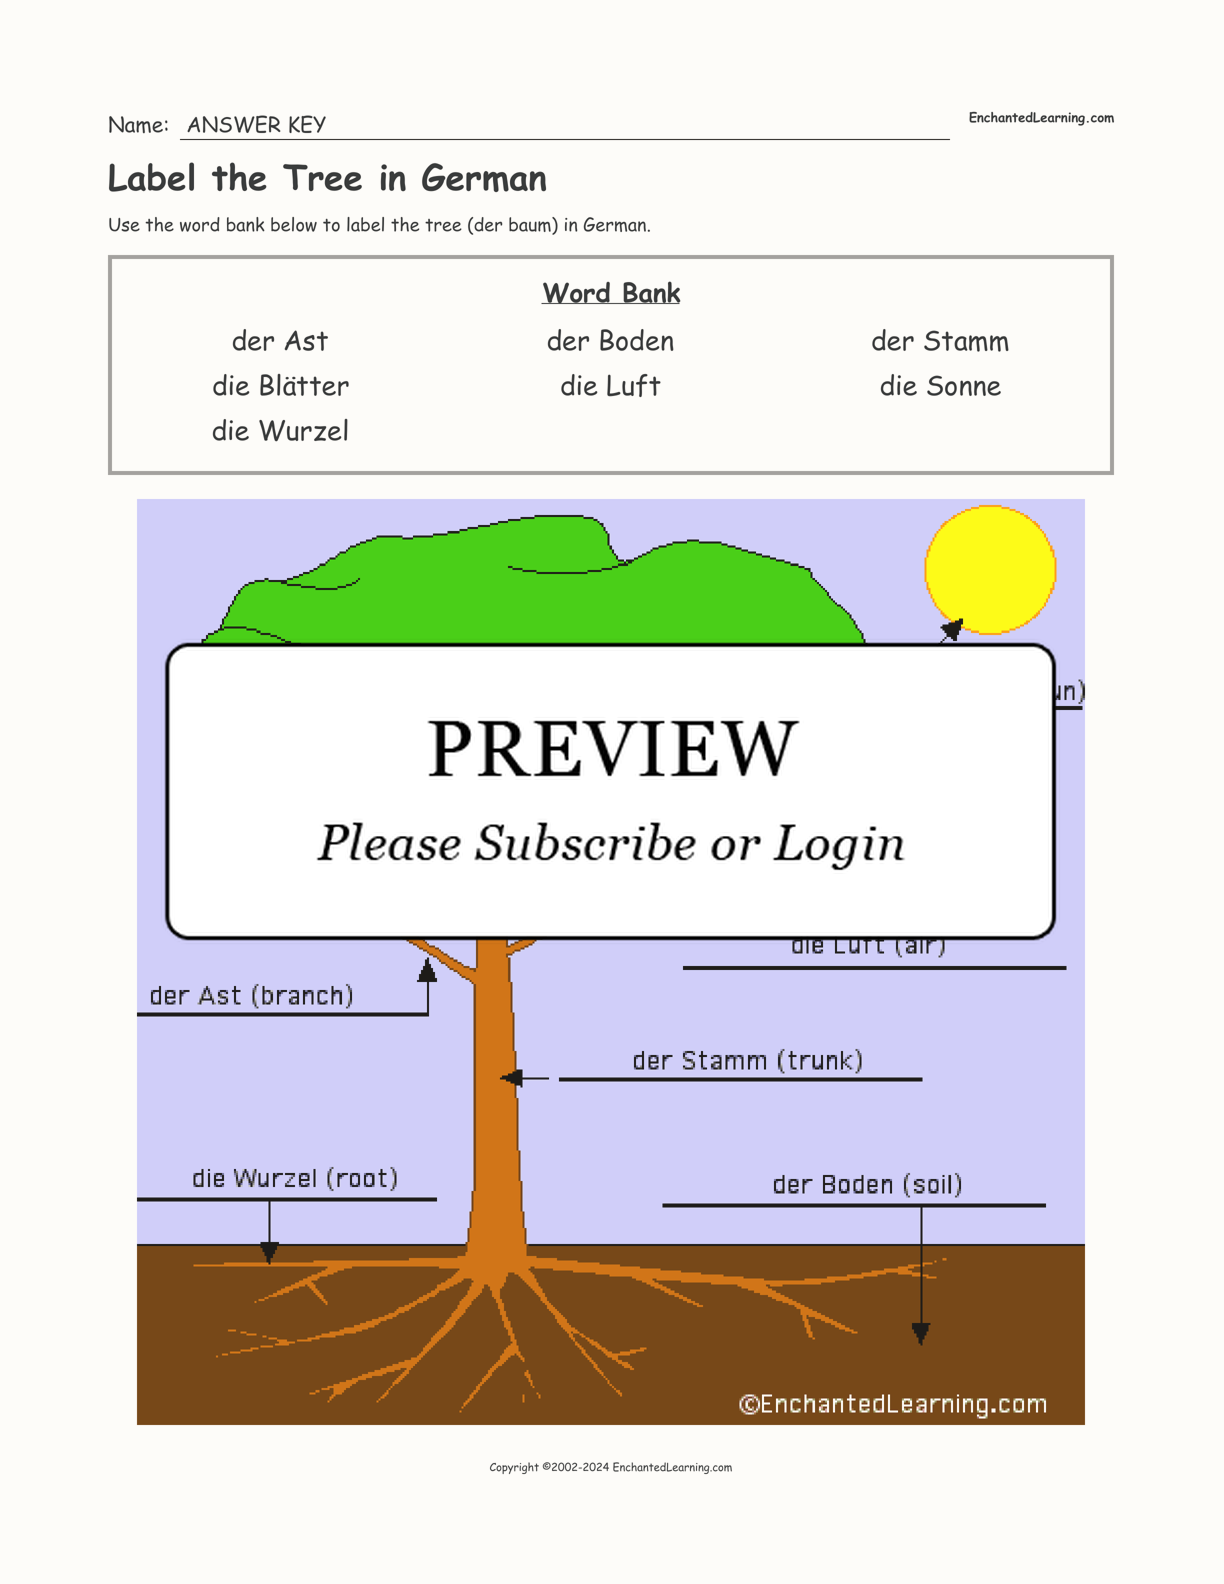 Label the Tree in German interactive worksheet page 2